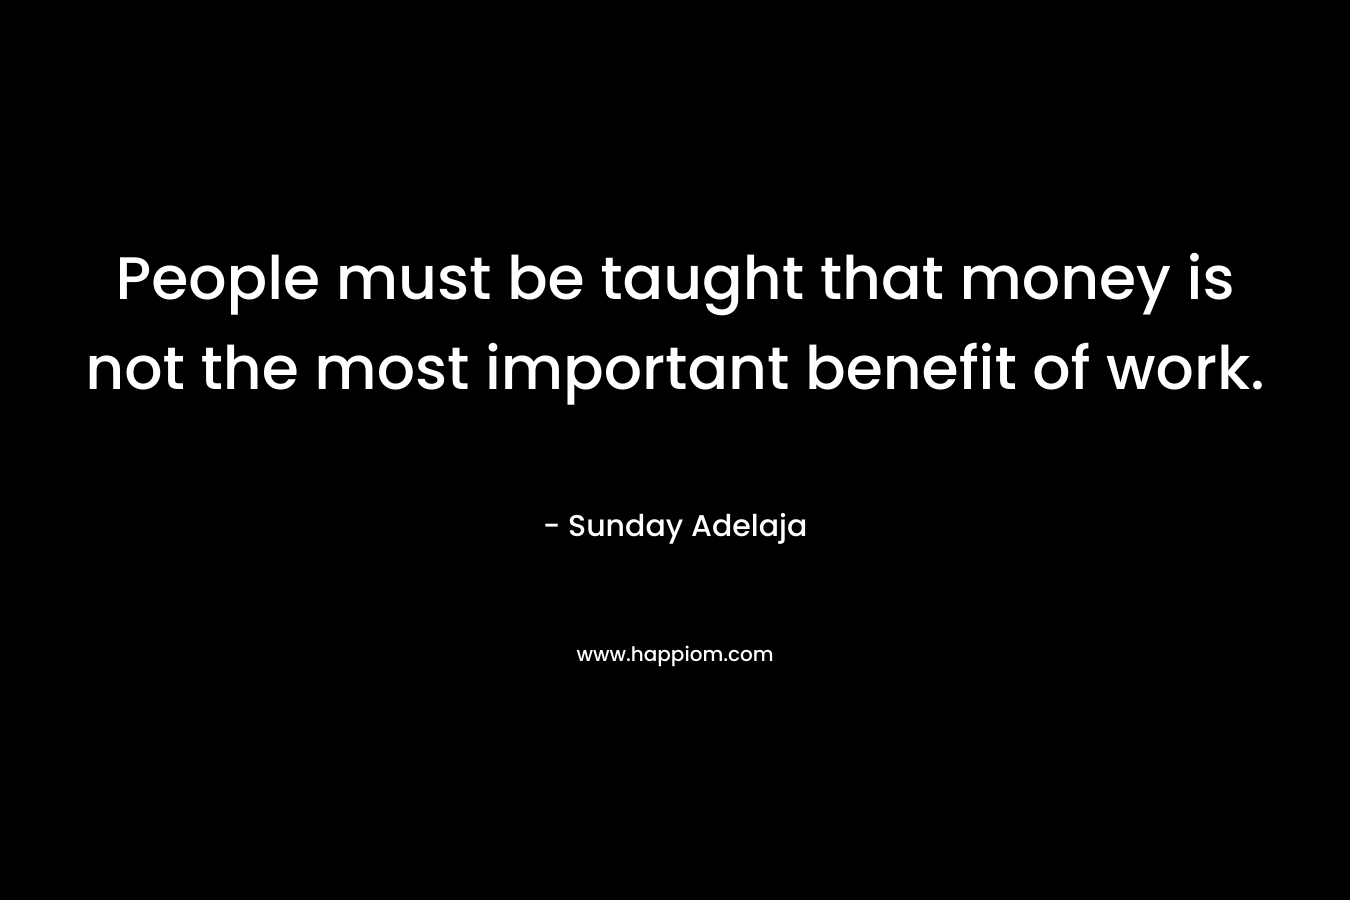 People must be taught that money is not the most important benefit of work.